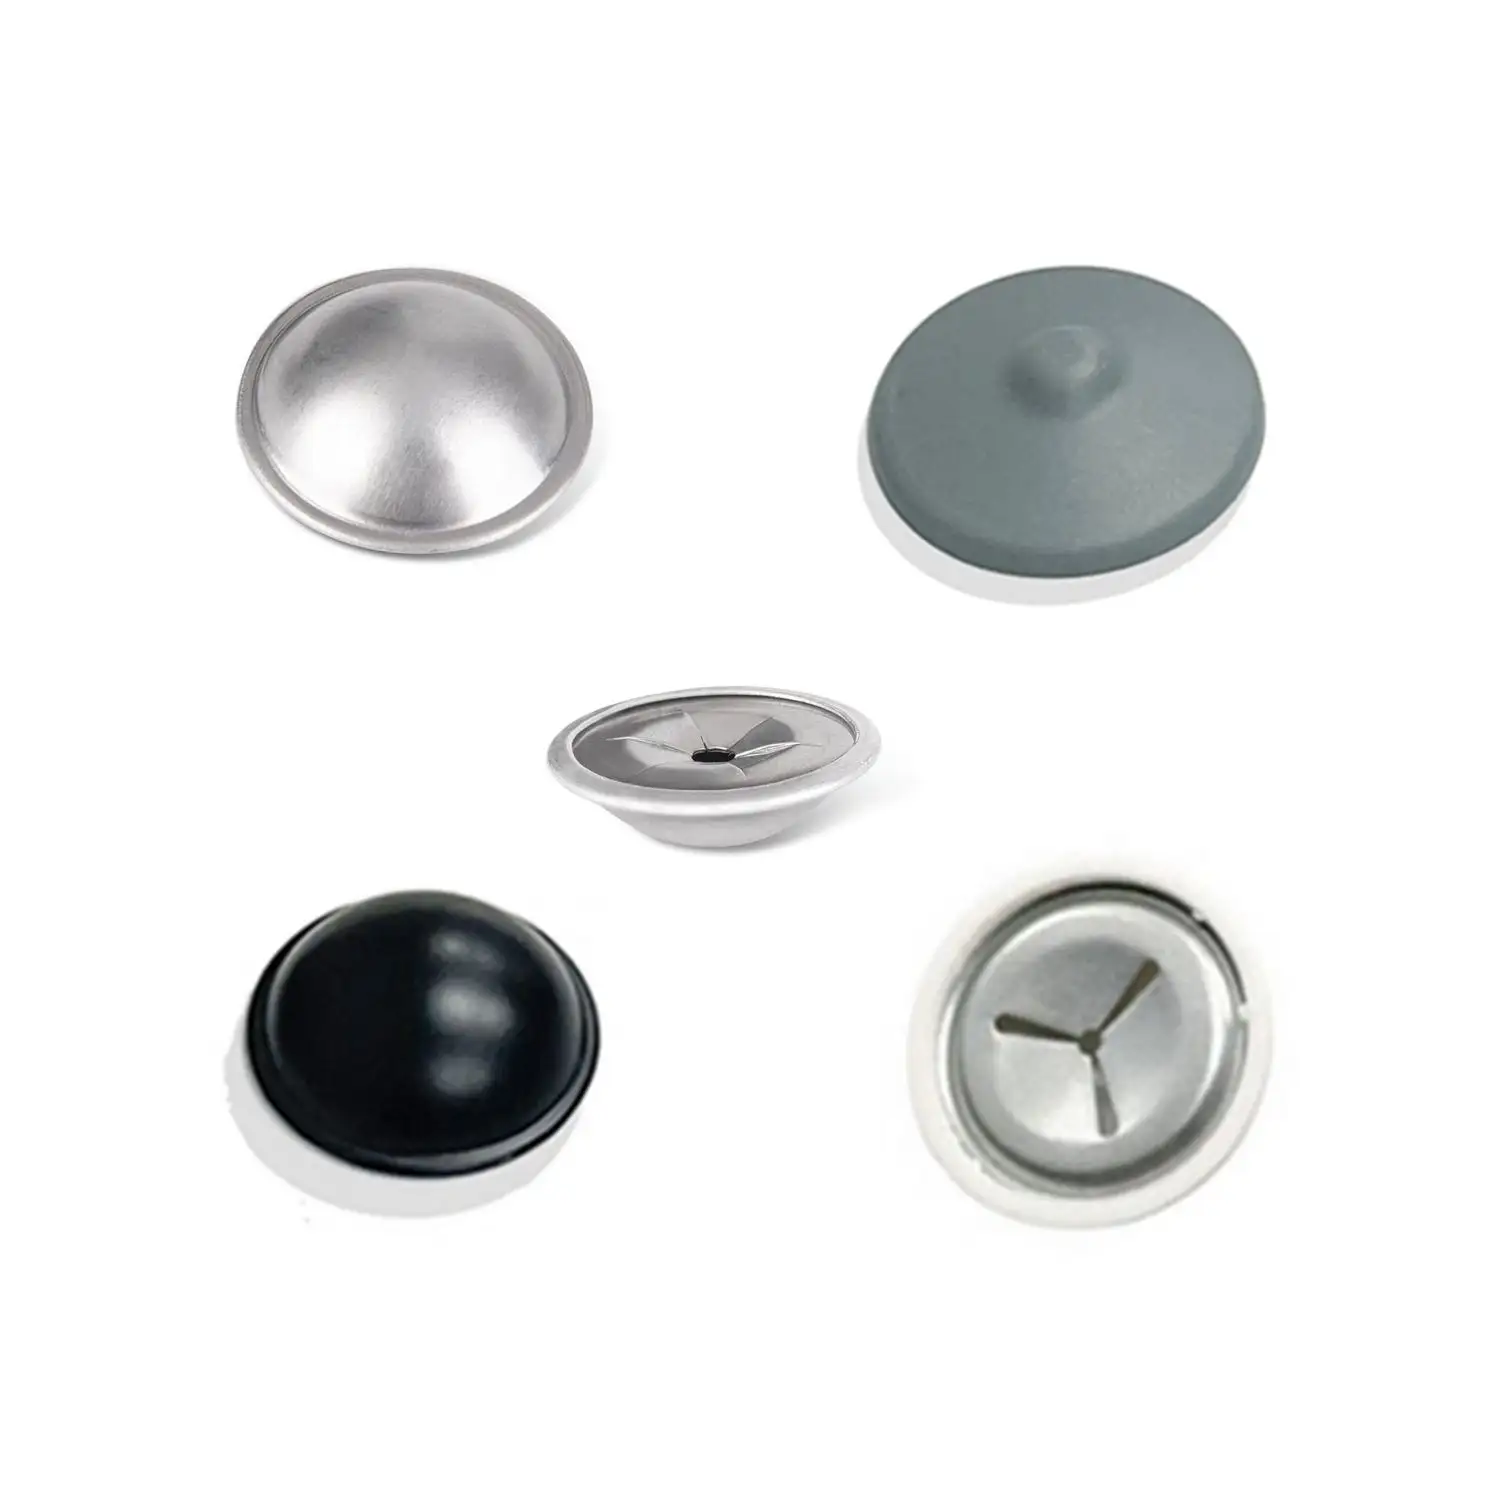 Insulation Nails Suppliers SS304 Aluminum Plastic Insulation Dome cap washer for CD Weld Pin Lacing anchor